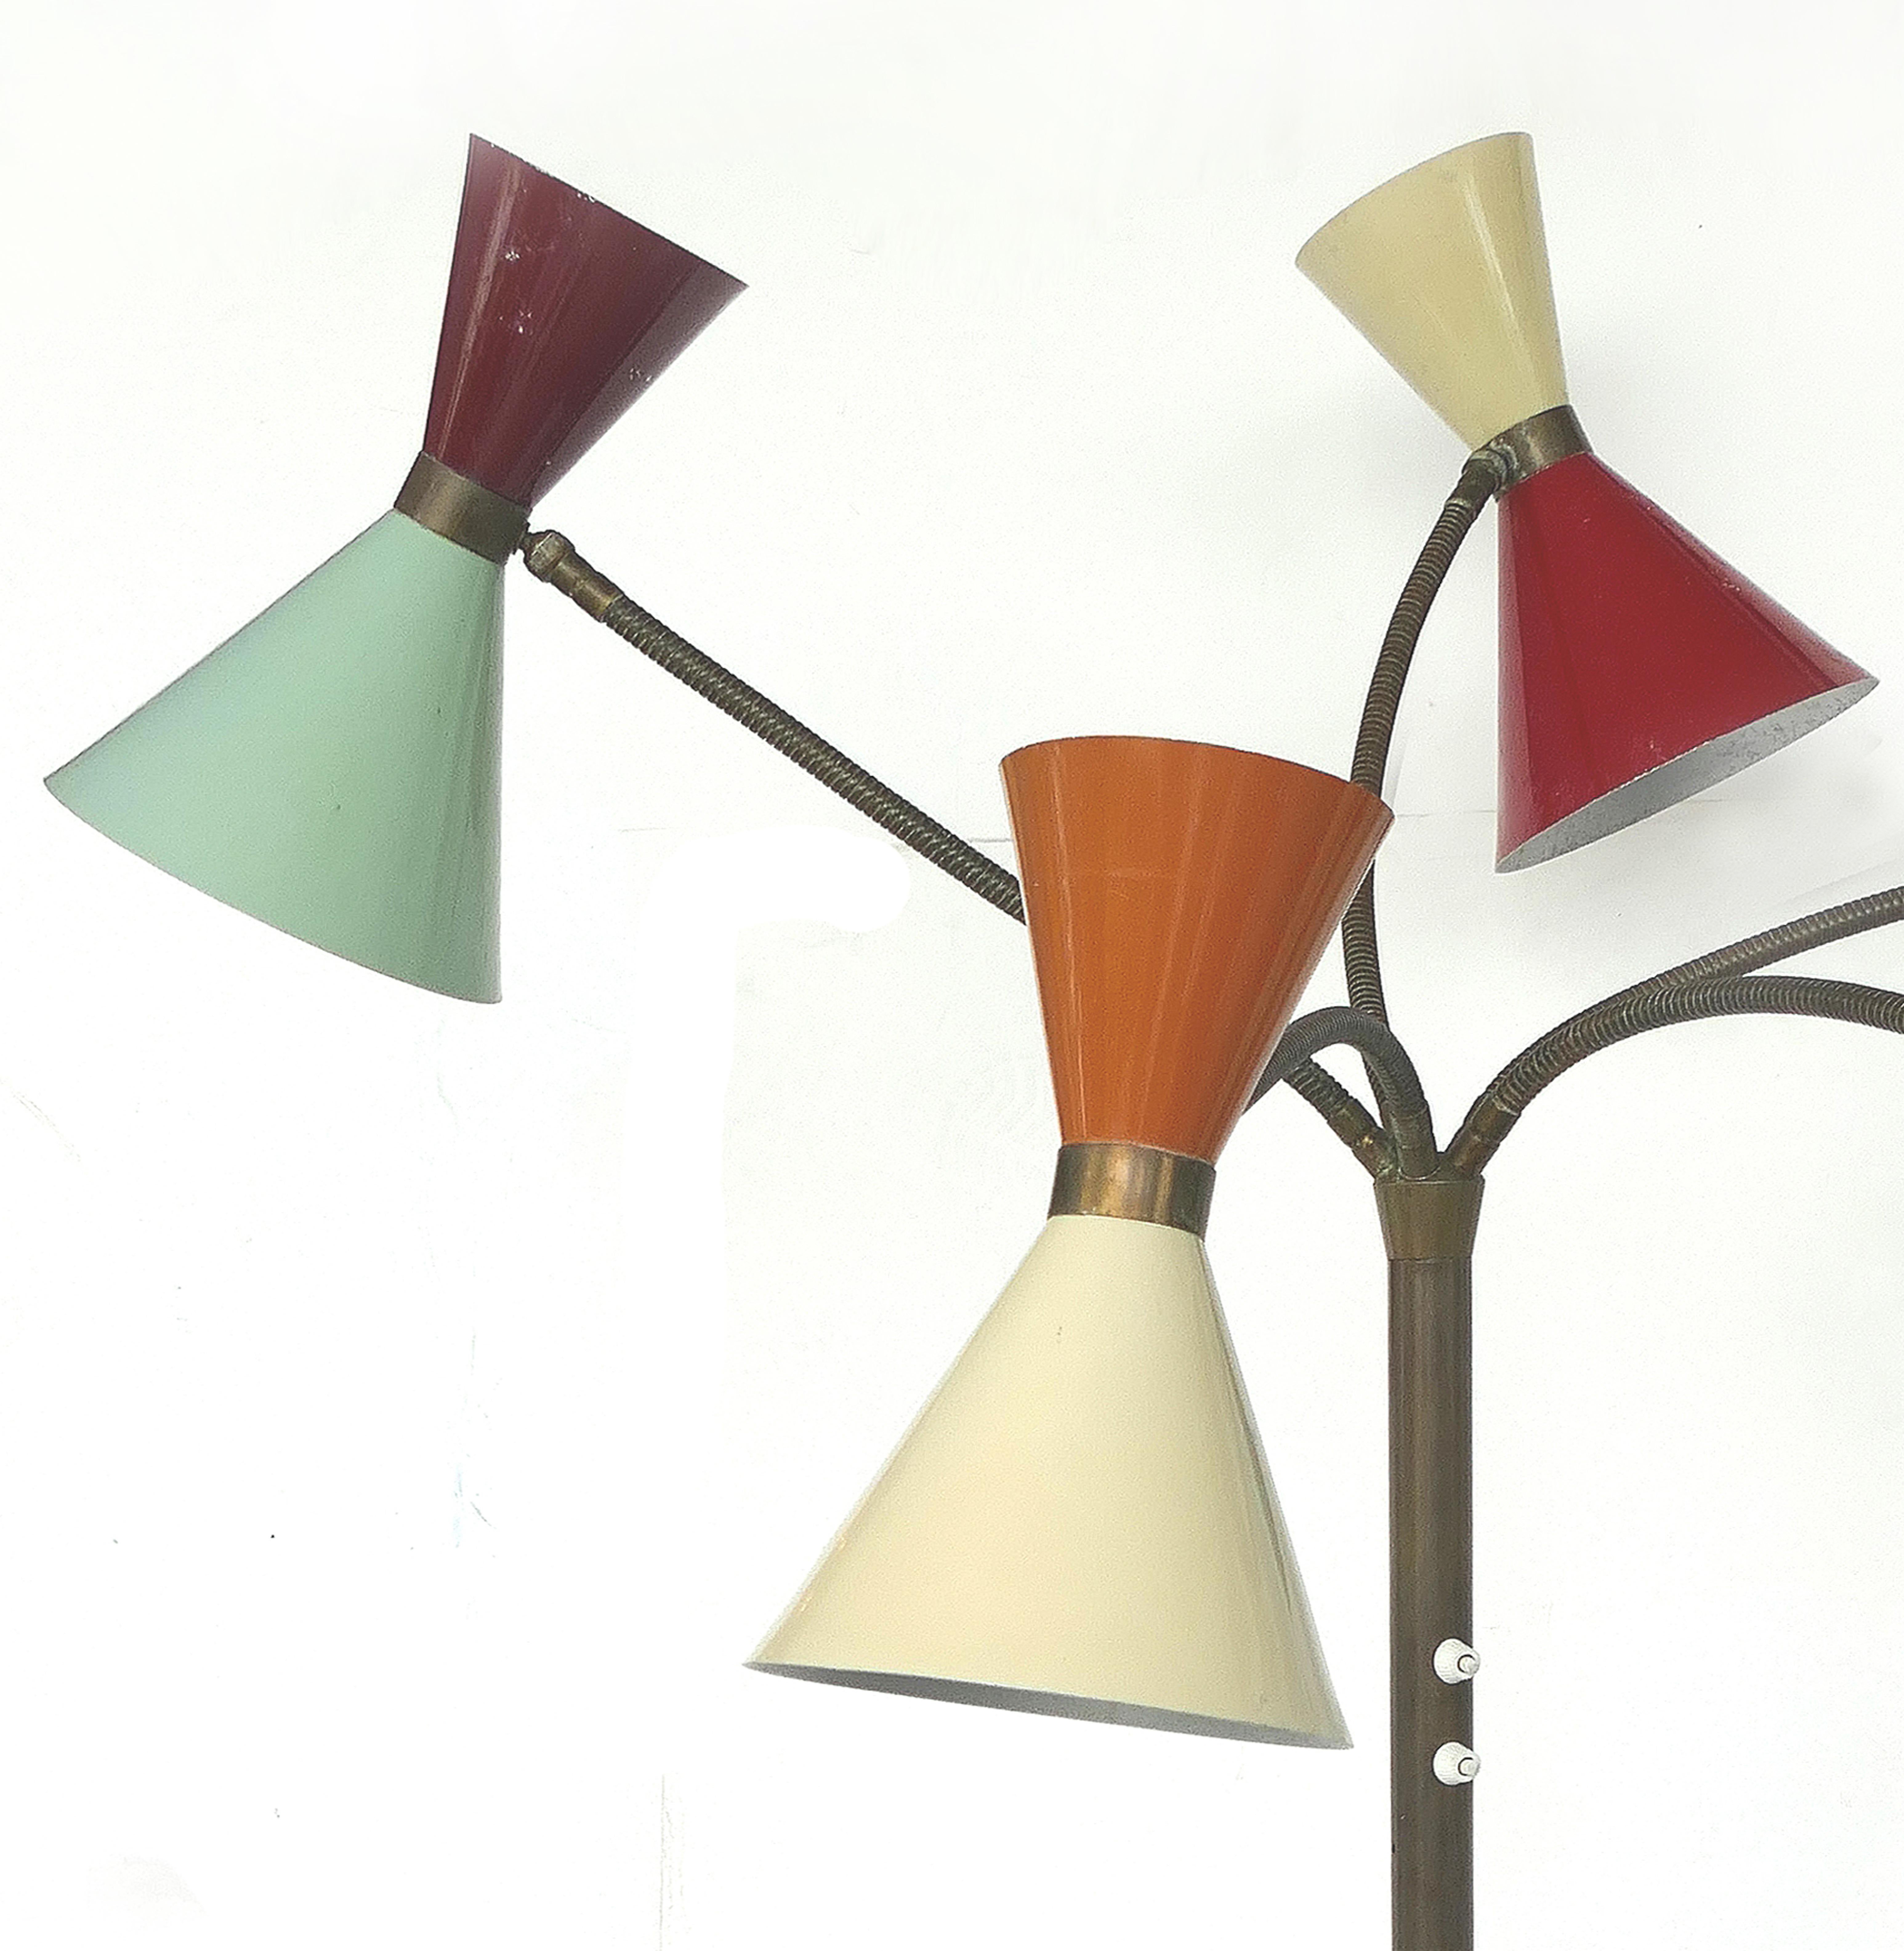 Stilnovo Midcentury Five-Arm Floor Lamp with Gooseneck Arms & Original Paint In Good Condition For Sale In Miami, FL